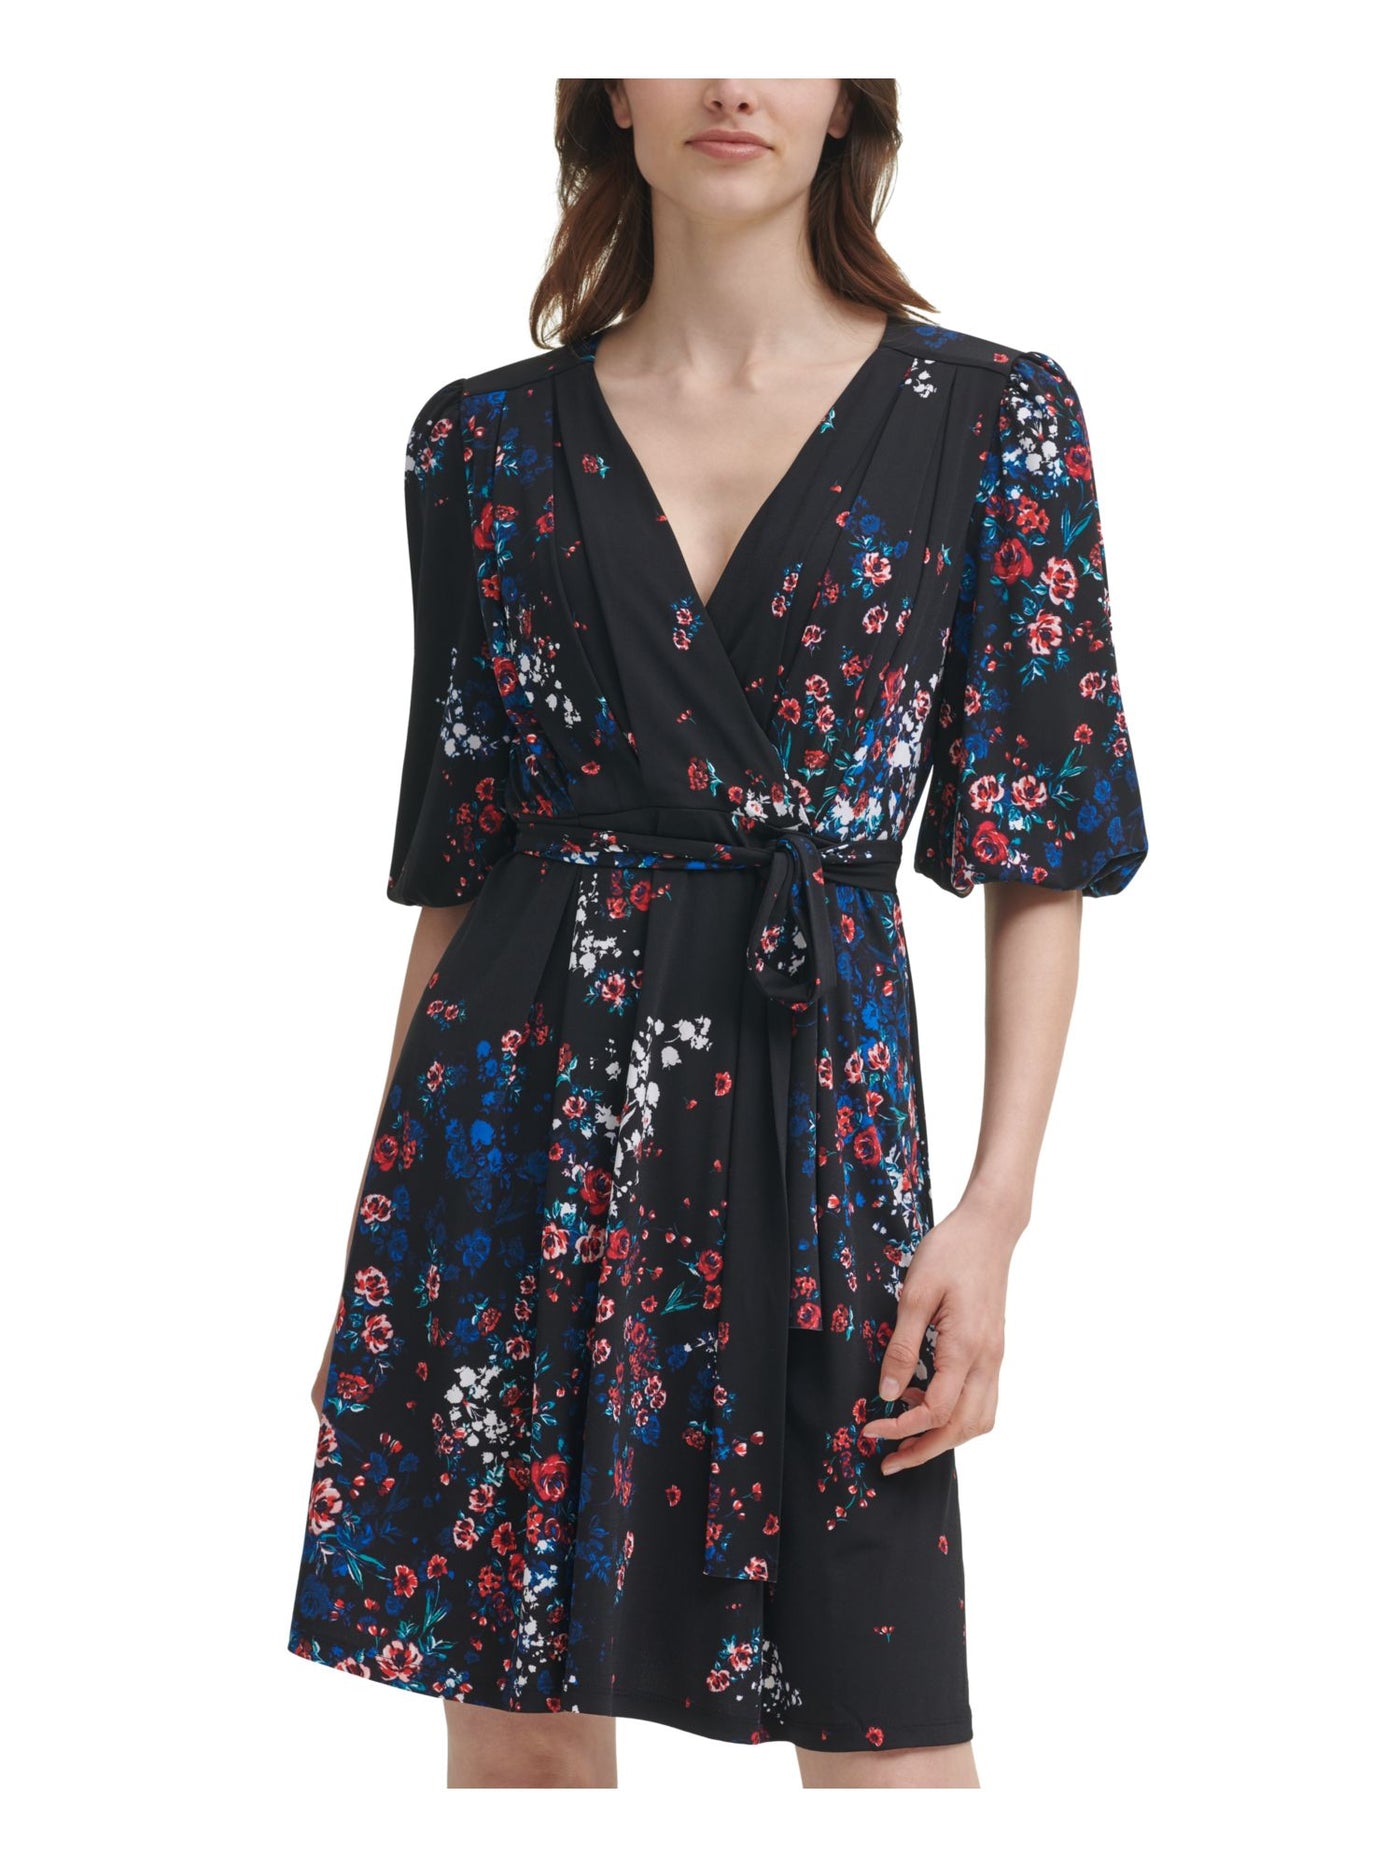 DKNY Womens Black Zippered Tie Floral Surplice Neckline Above The Knee Cocktail Shift Dress 10